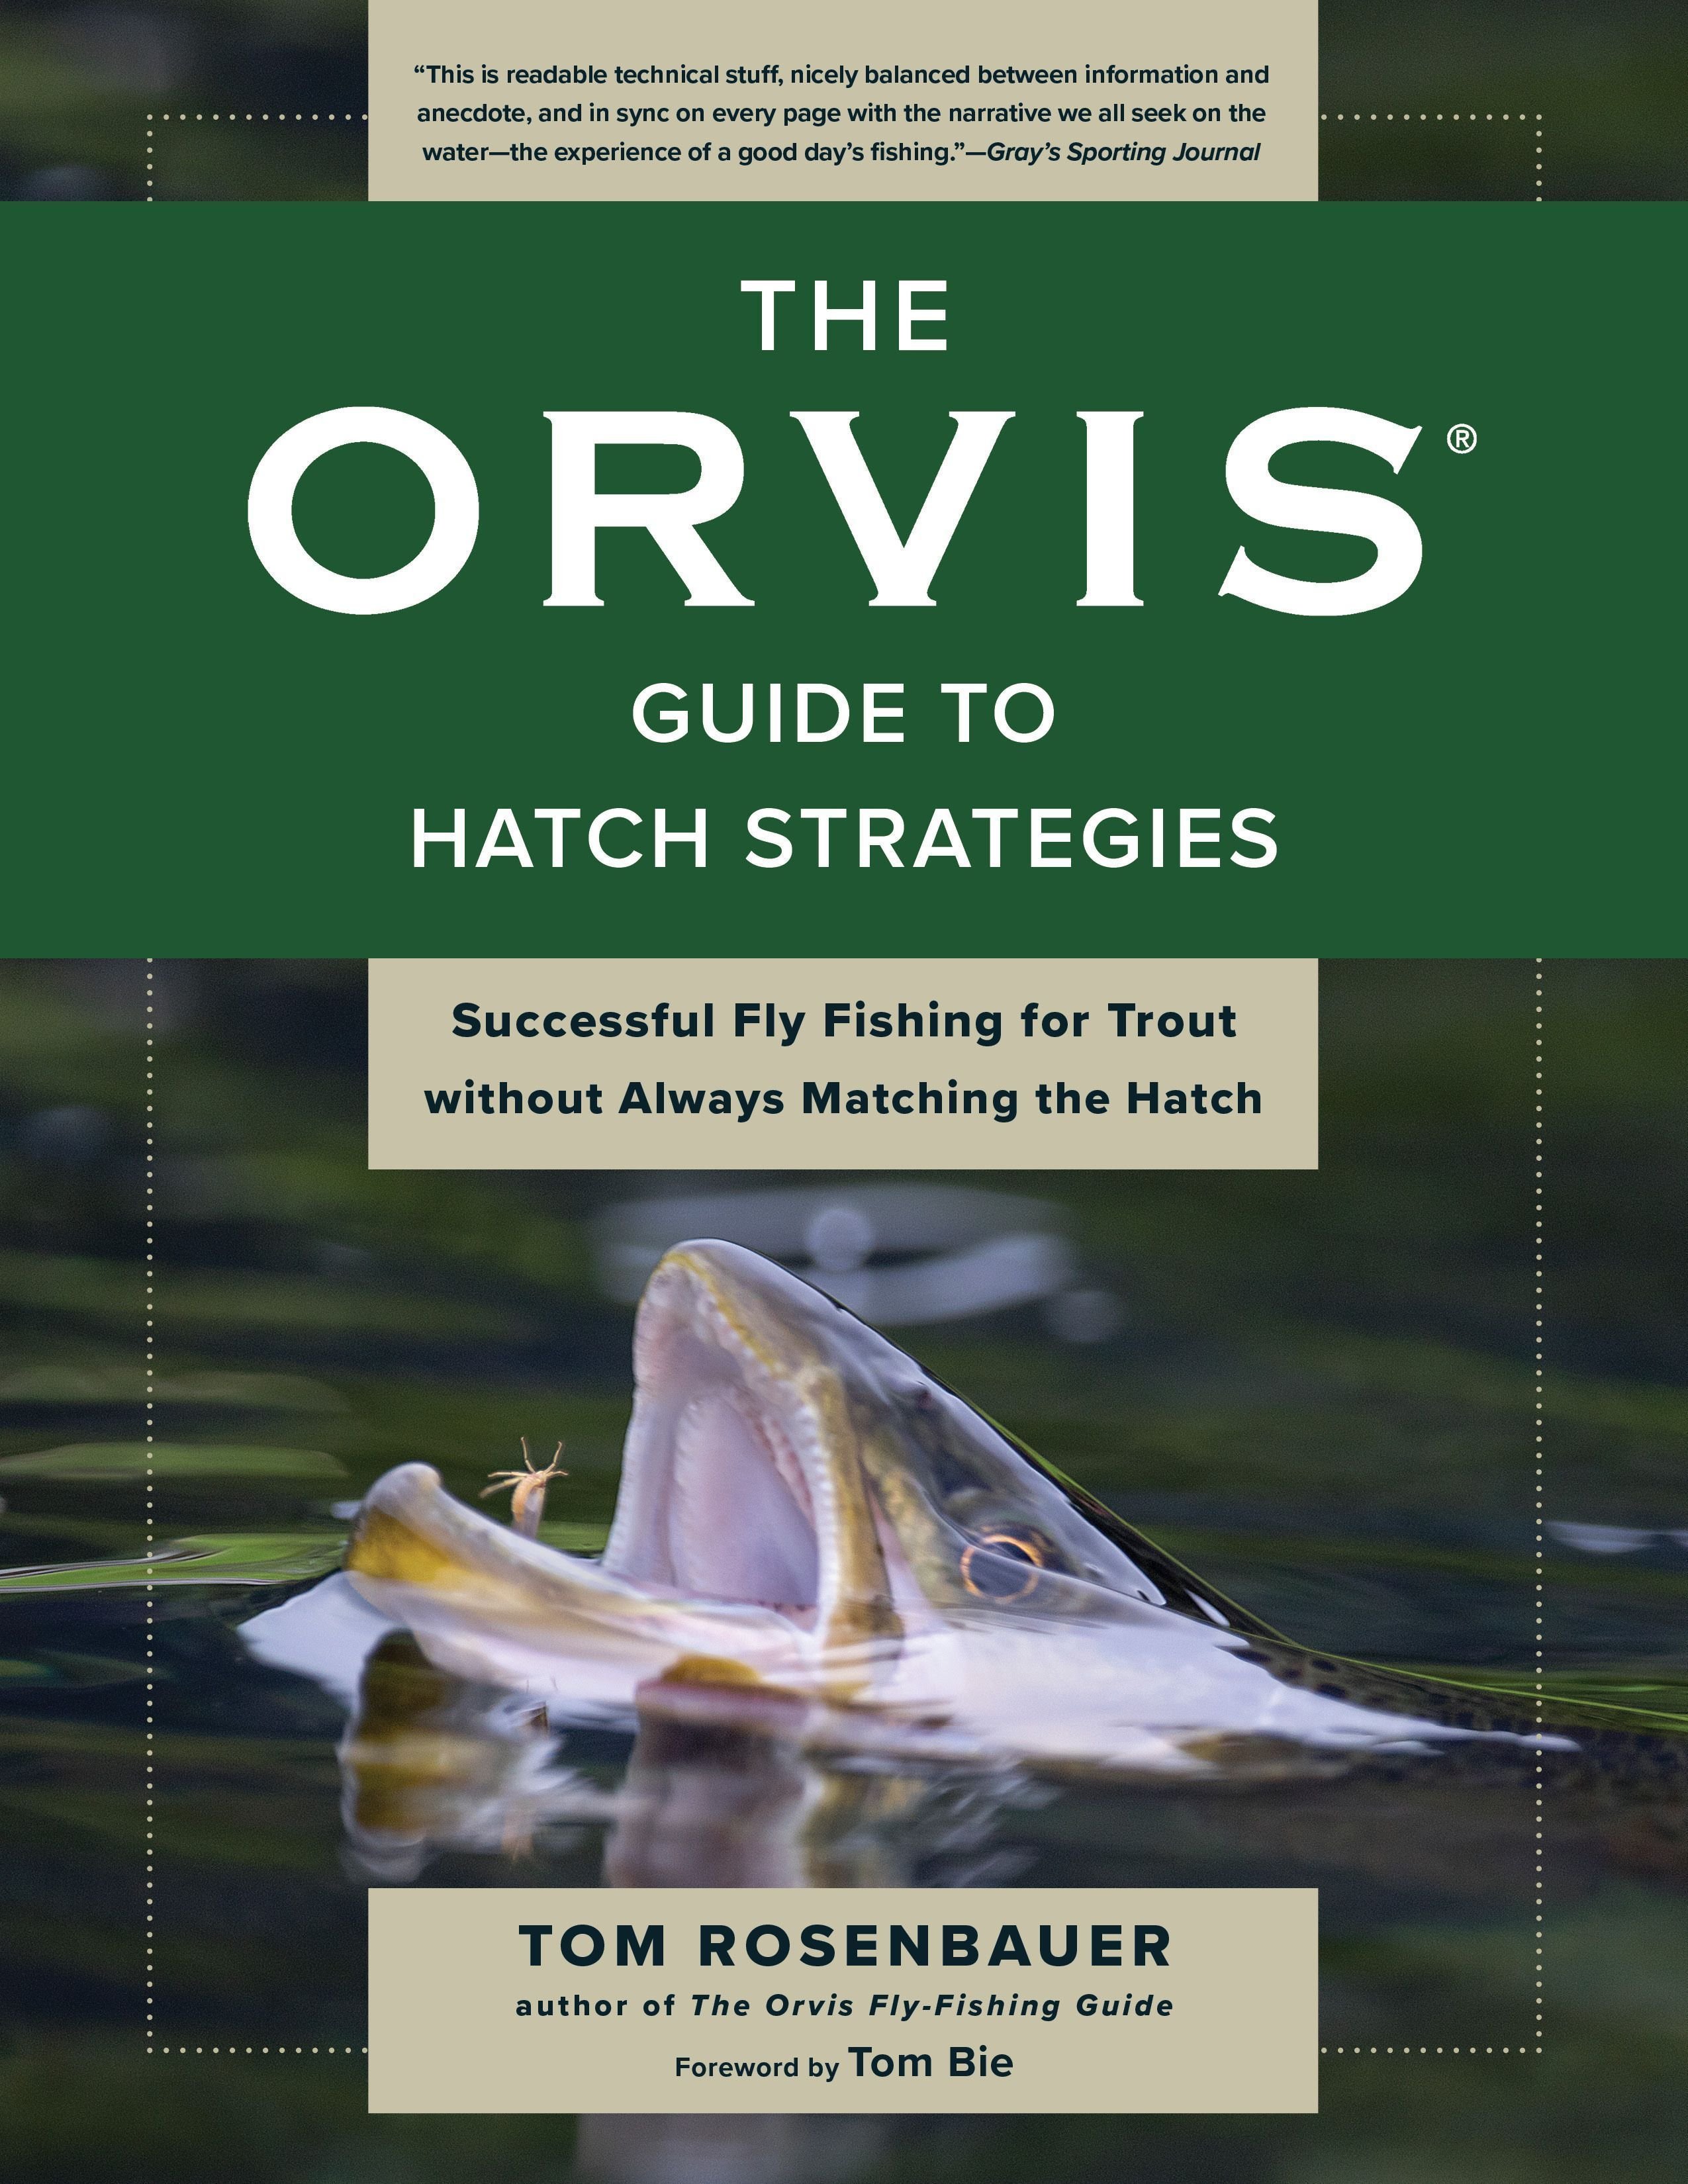 The Orvis Guide to Hatch Strategies